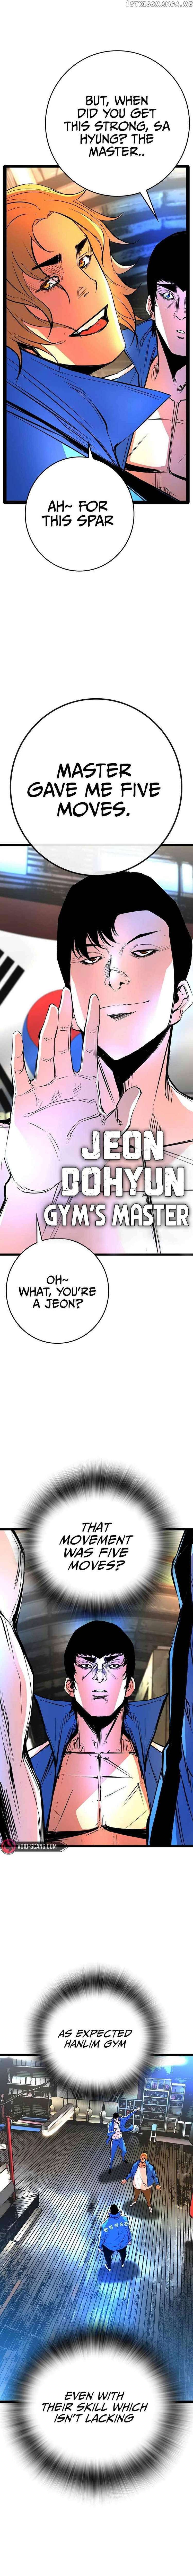 Hanlim Gym Chapter 127 page 21